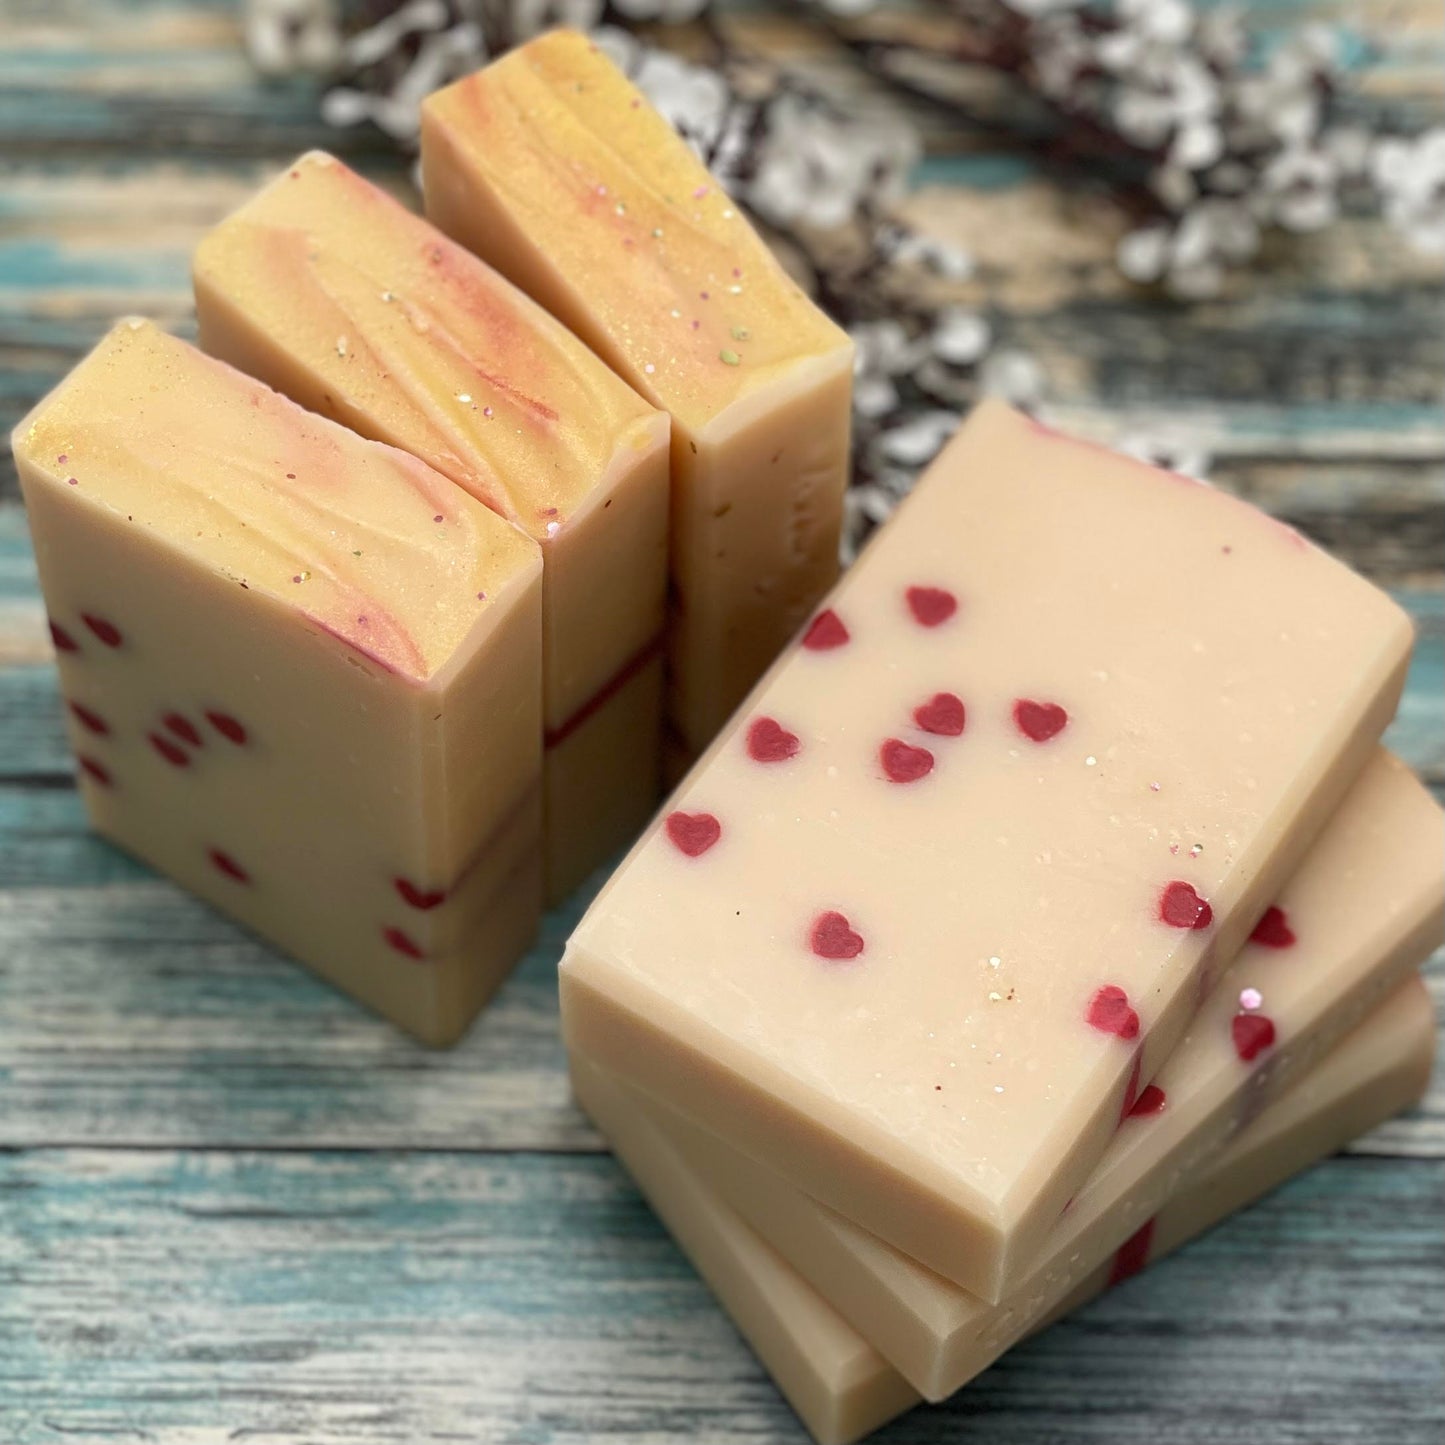 Sweetheart Soap | Handmade Fancy Artisan Bar with Coconut Milk & Shea Butter | Pink Grapefruit Scent | Valentine's or Galentine's Gift